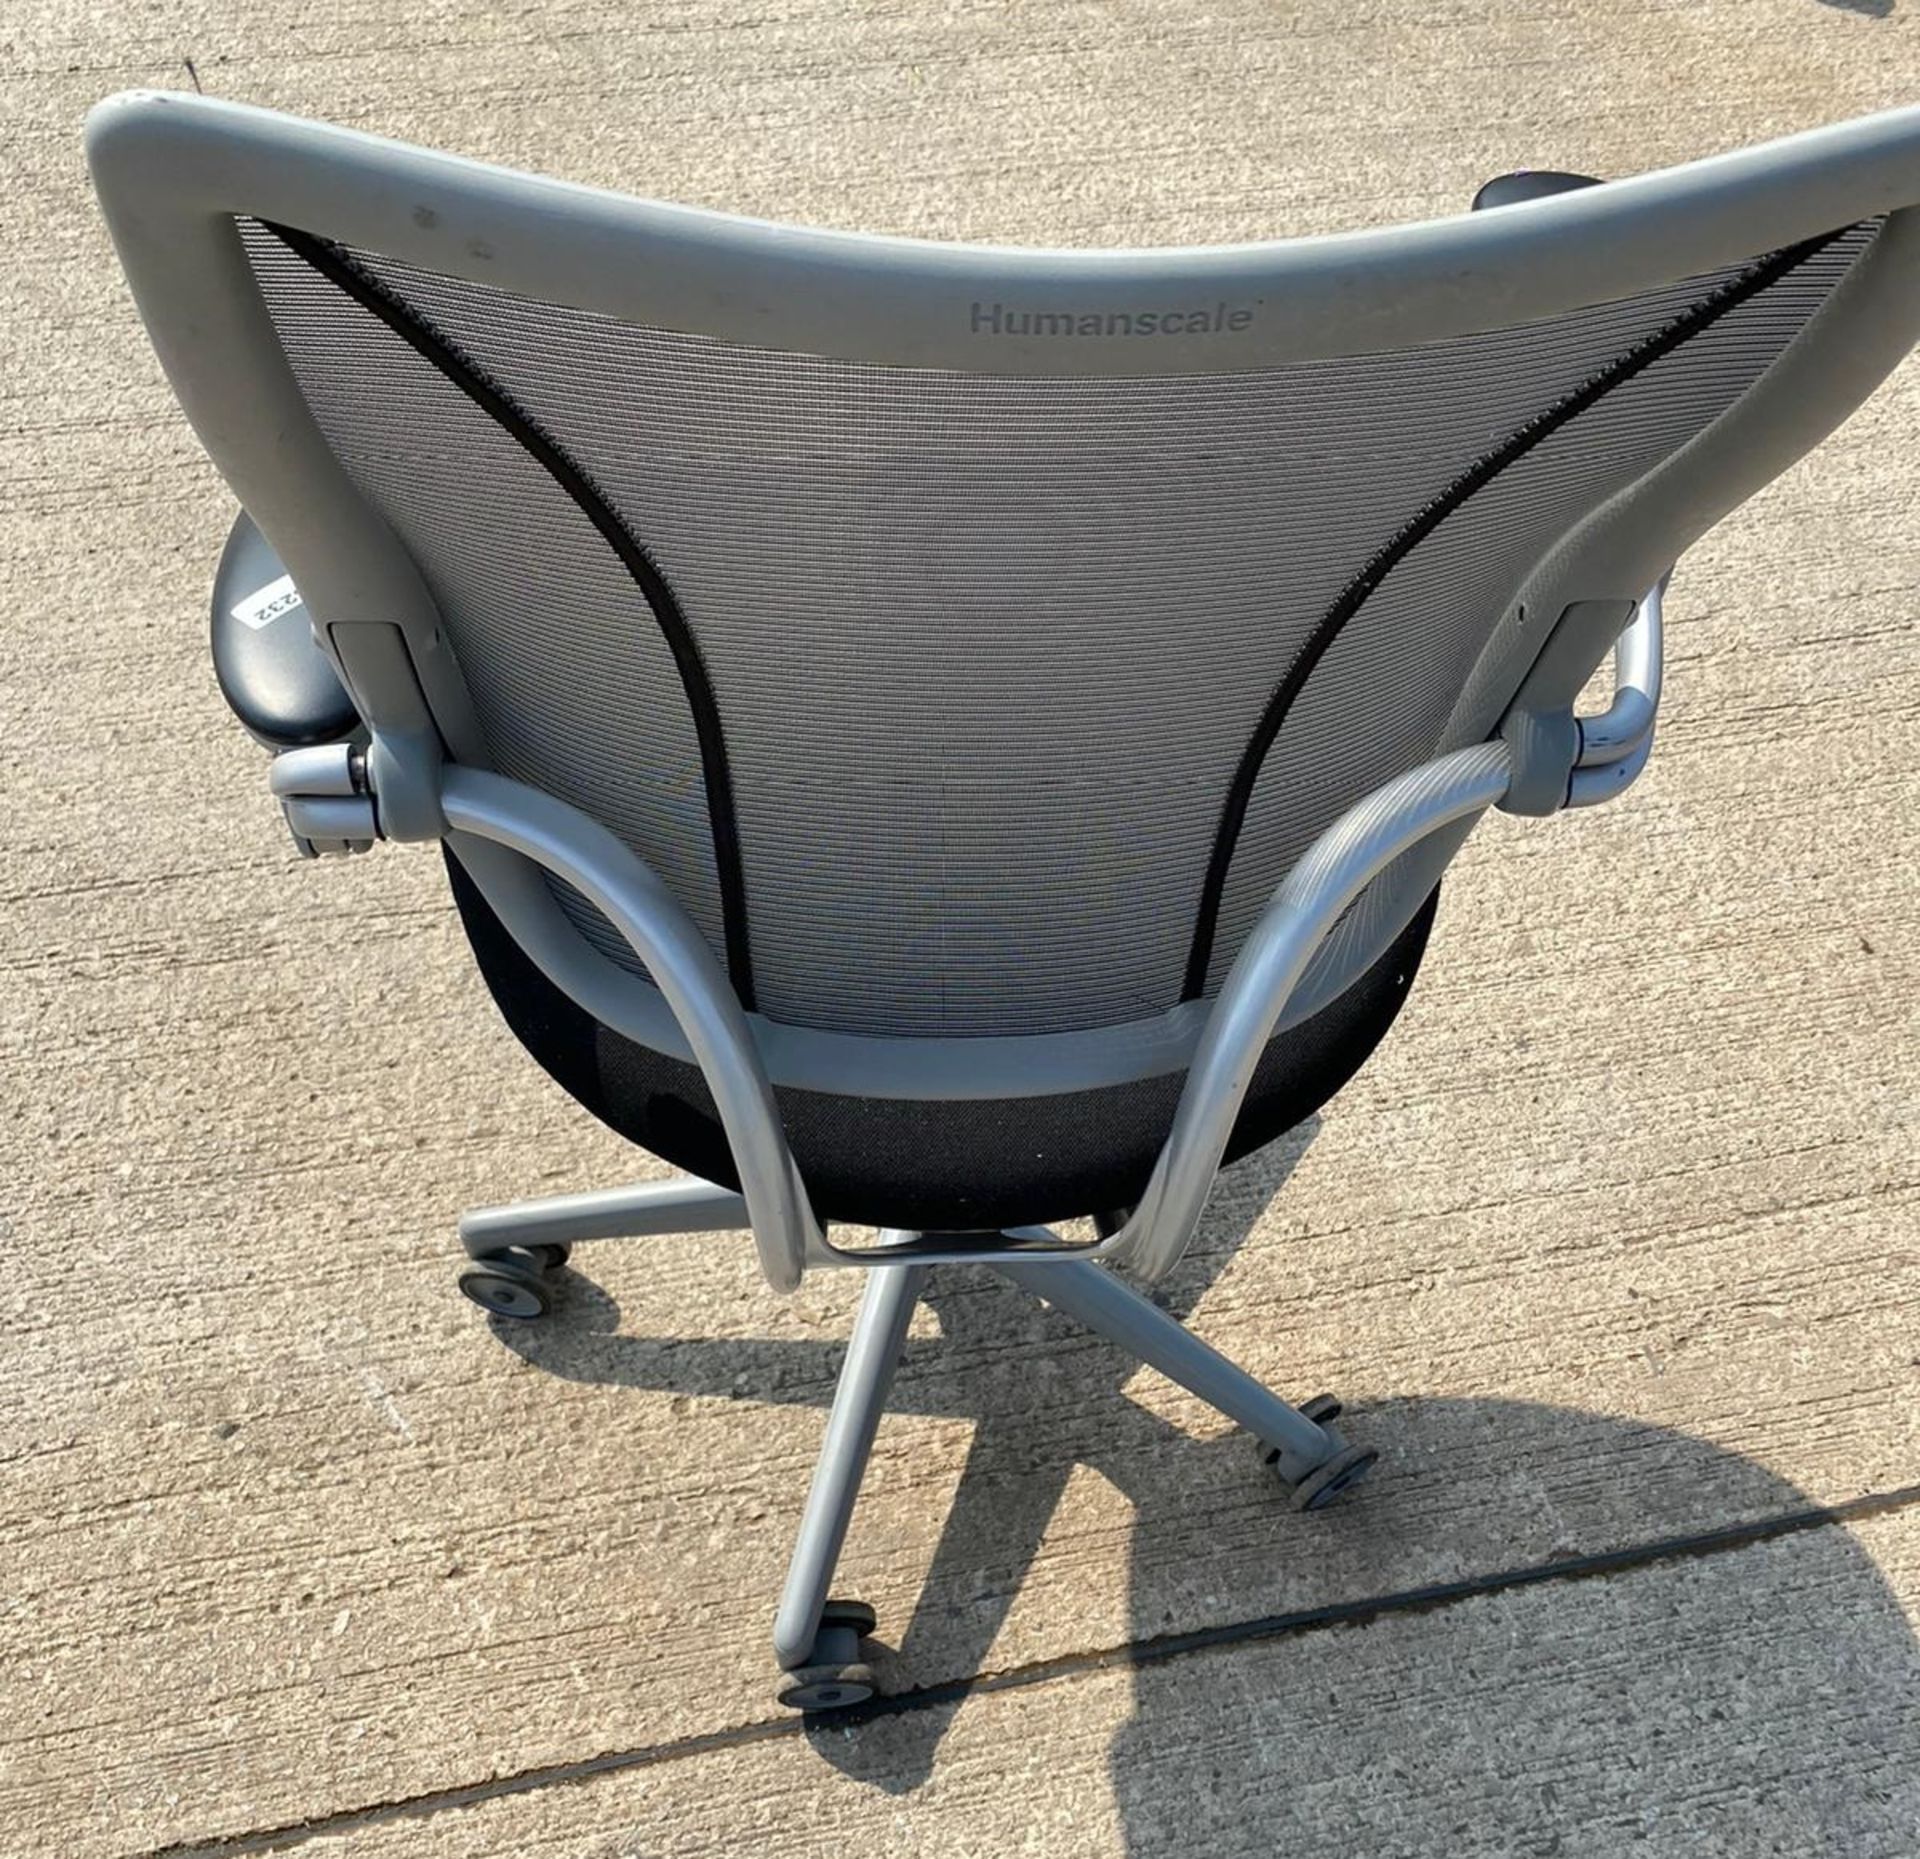 1 x Humanscale Liberty Task Chair in Black and Grey - Used Condition - Location: Altrincham WA14 - - Image 4 of 9